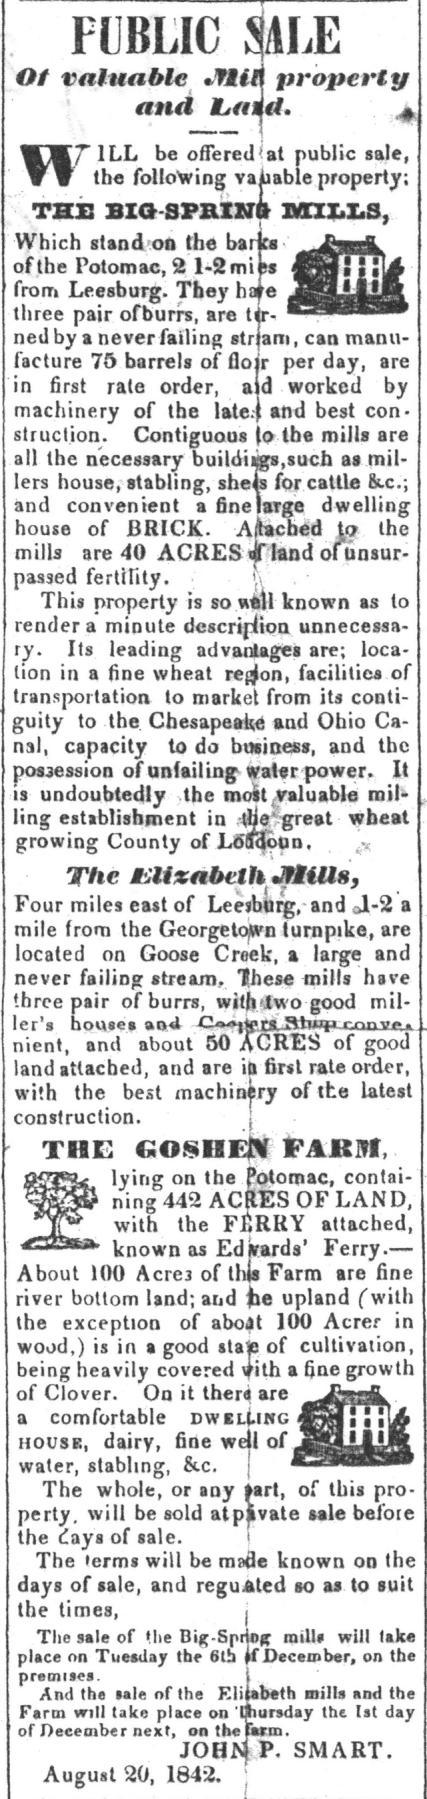 The adjacent advertisement, also placed on August 20, 1842, locates and describes the three properties, with their appurtenances.